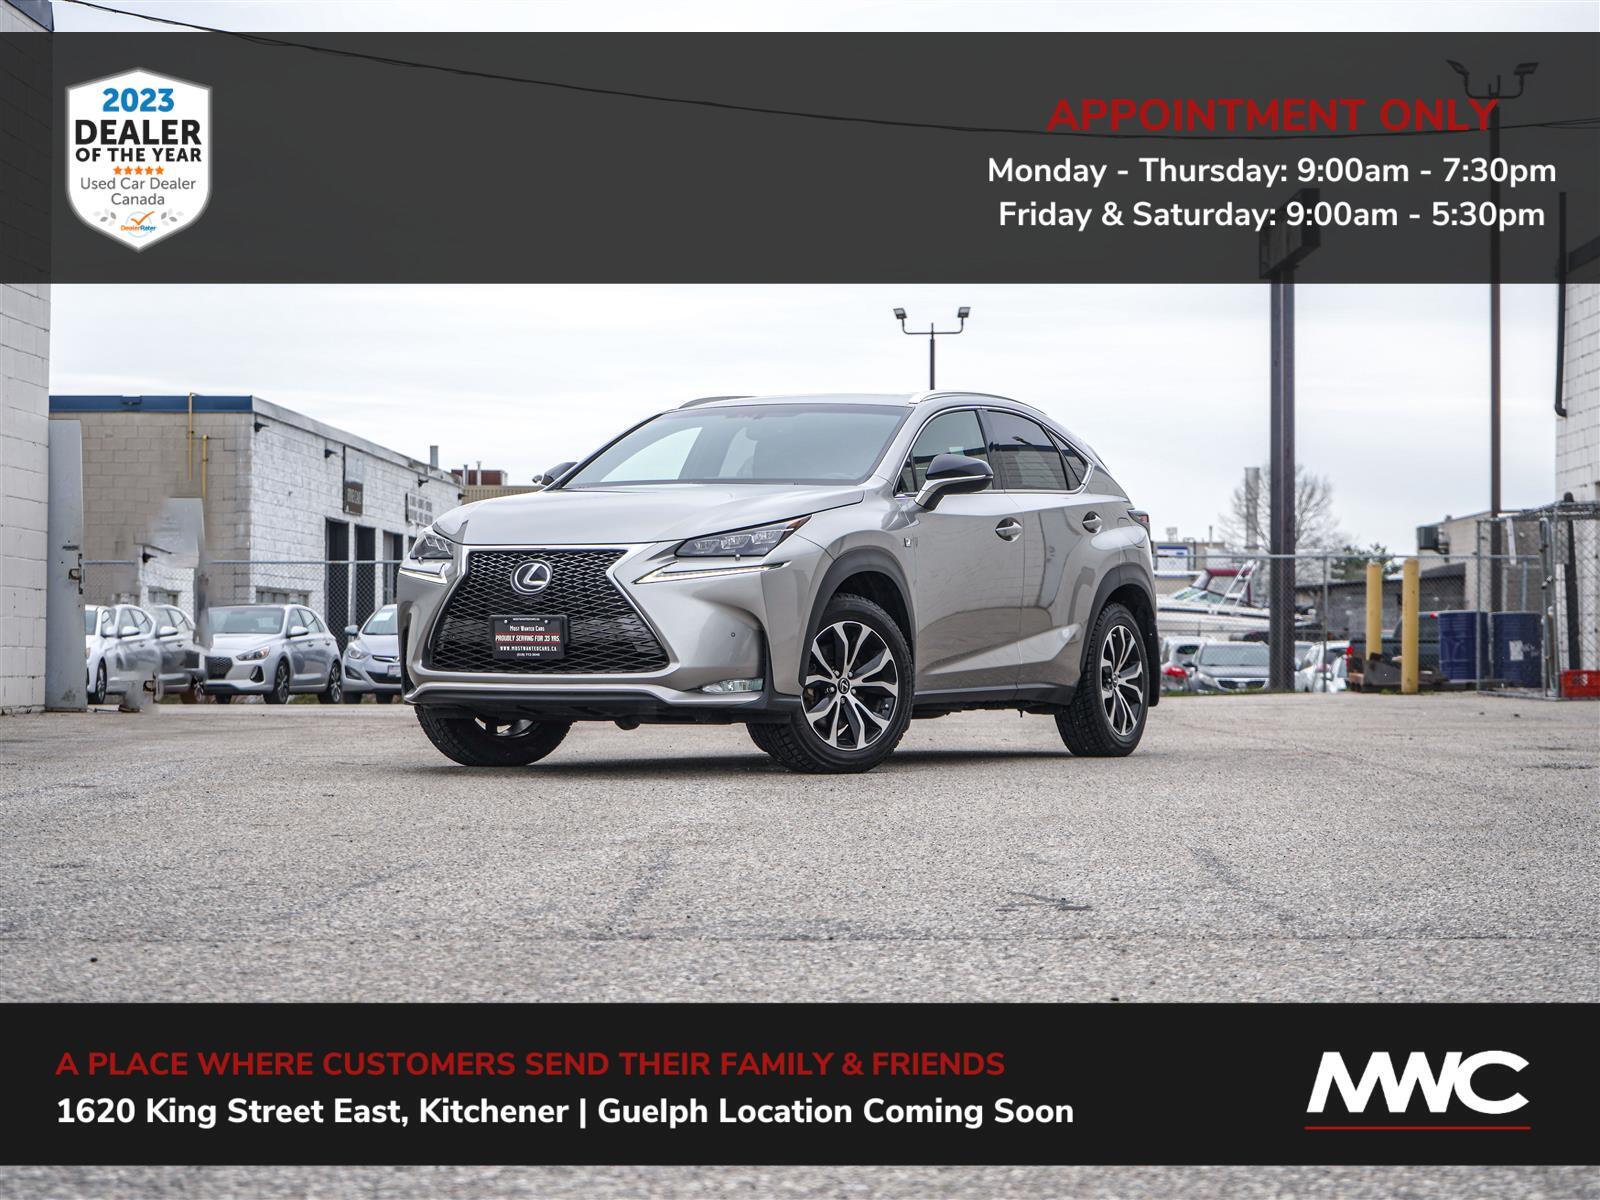 2017 Lexus NX 200t AWD | IN GUELPH, BY APPT. ONLY